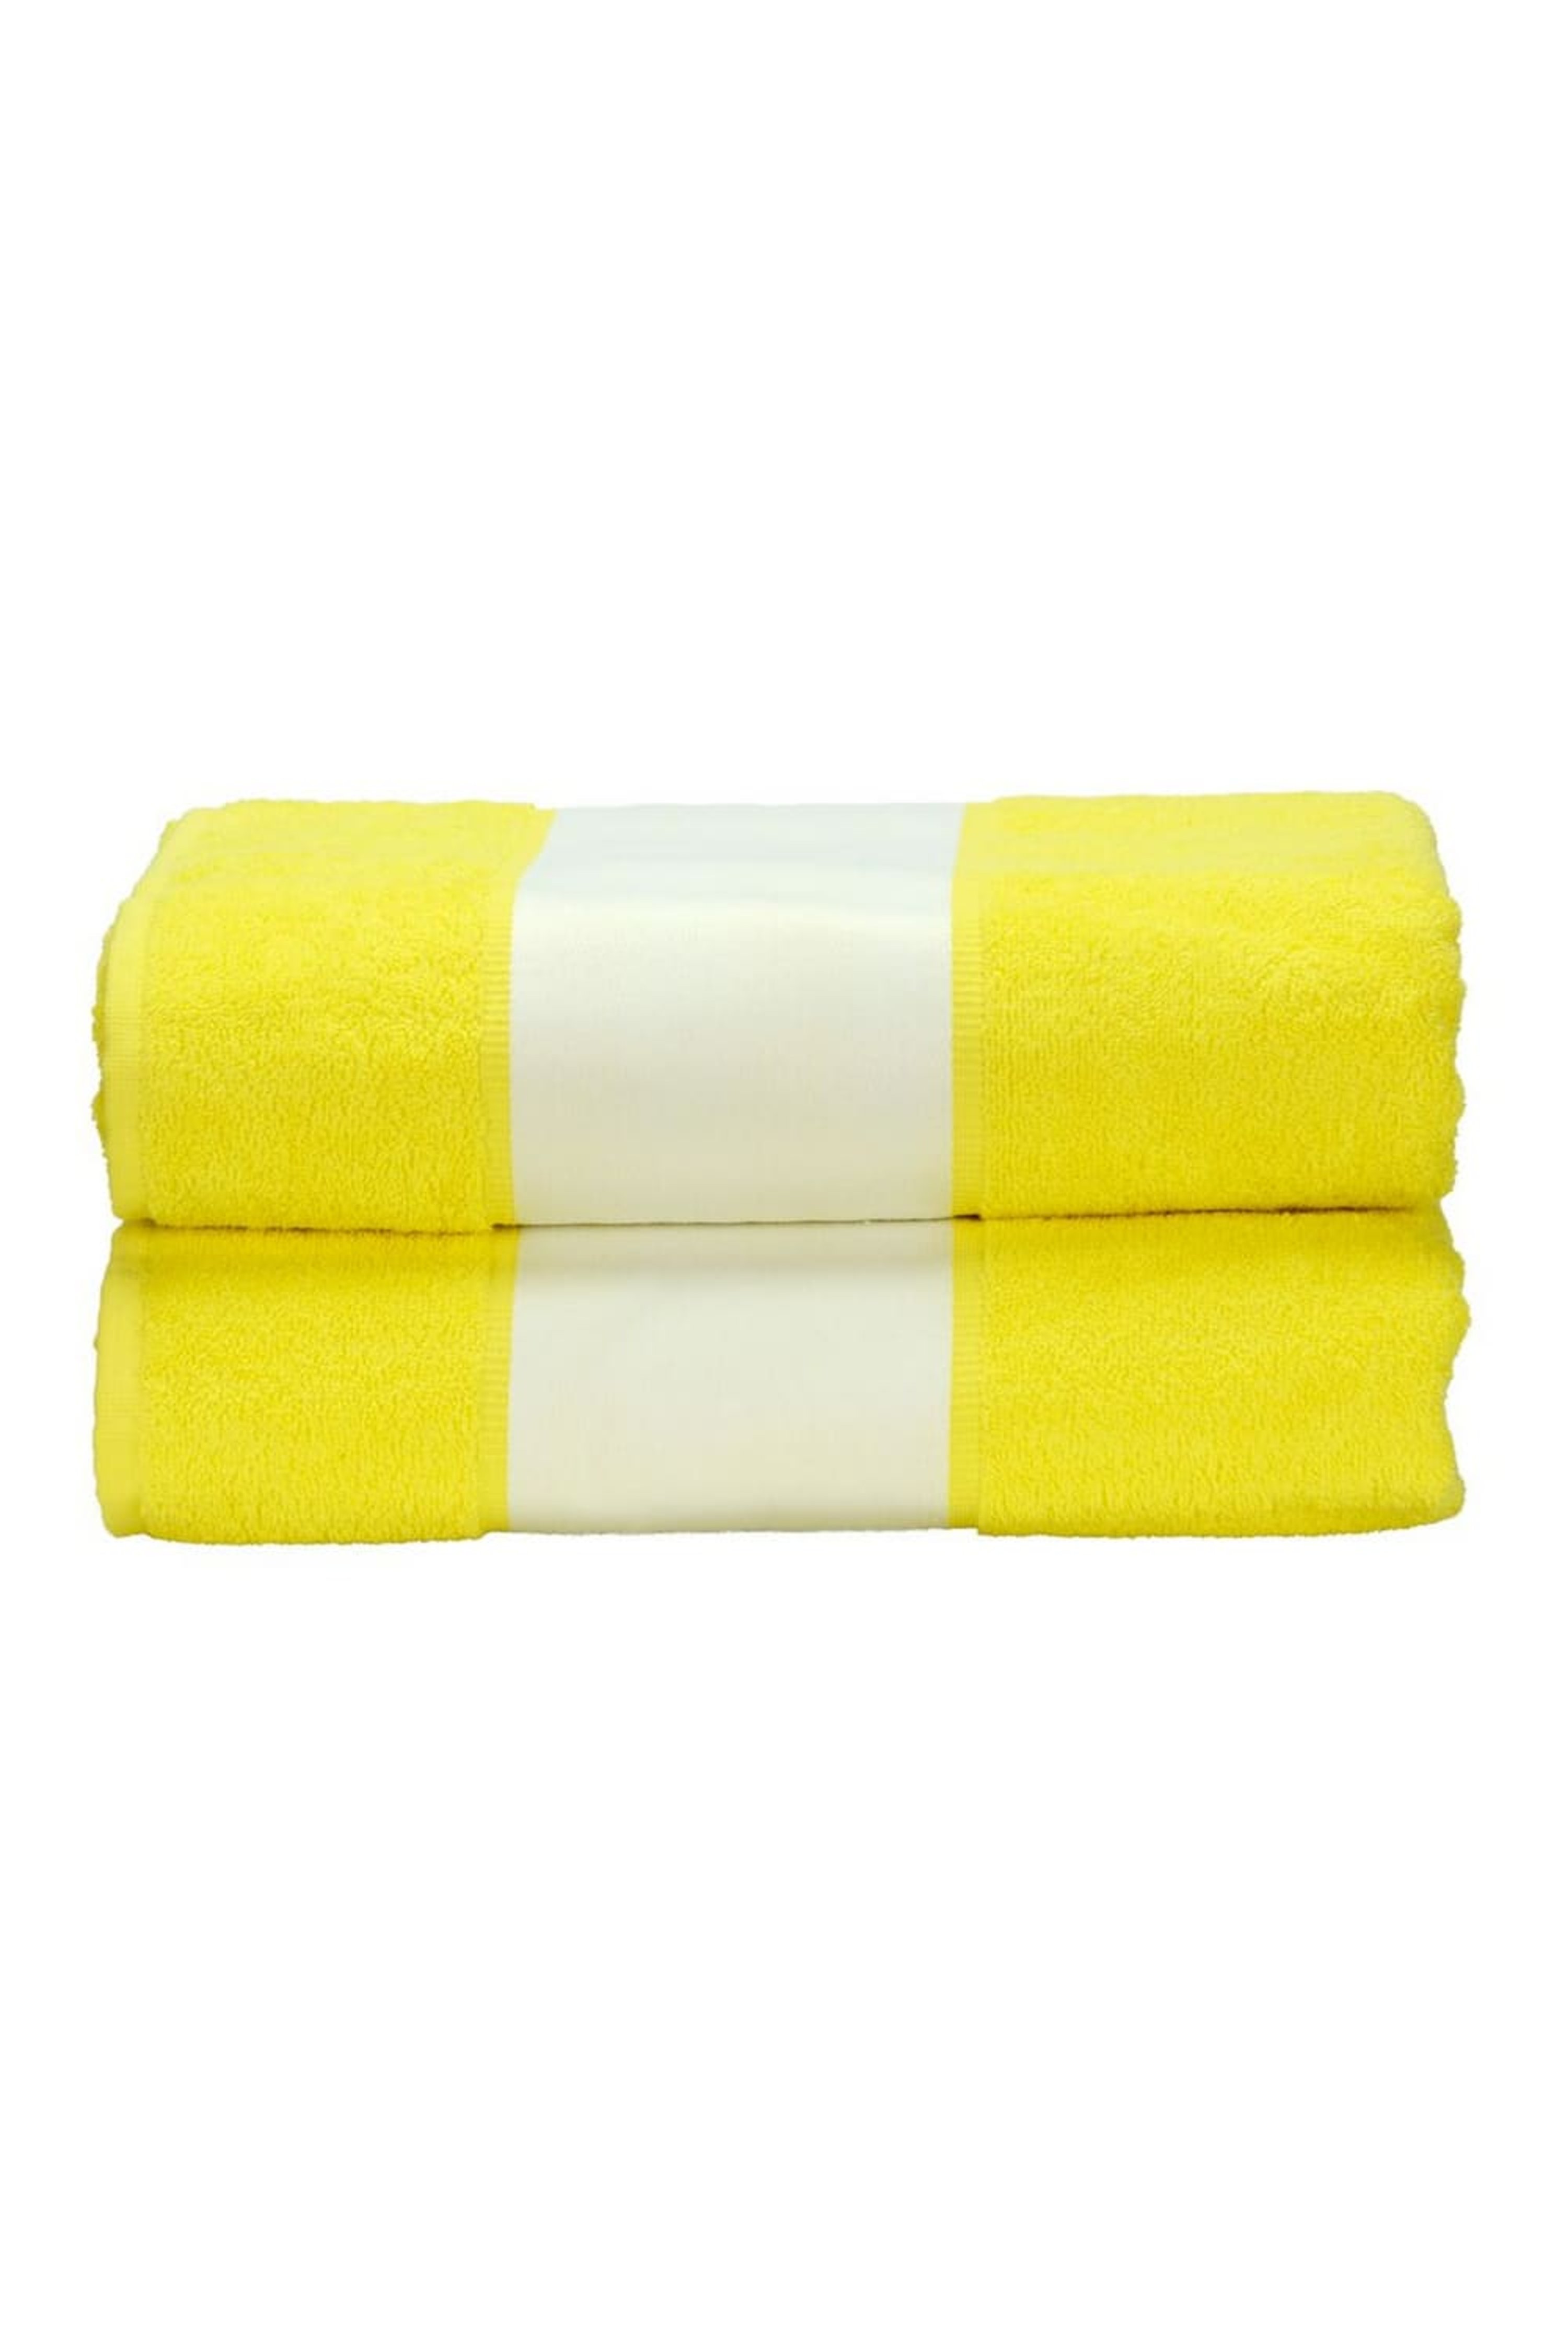 A&R TOWELS A&R TOWELS A&R TOWELS SUBLI-ME BATH TOWEL (BRIGHT YELLOW) (ONE SIZE)